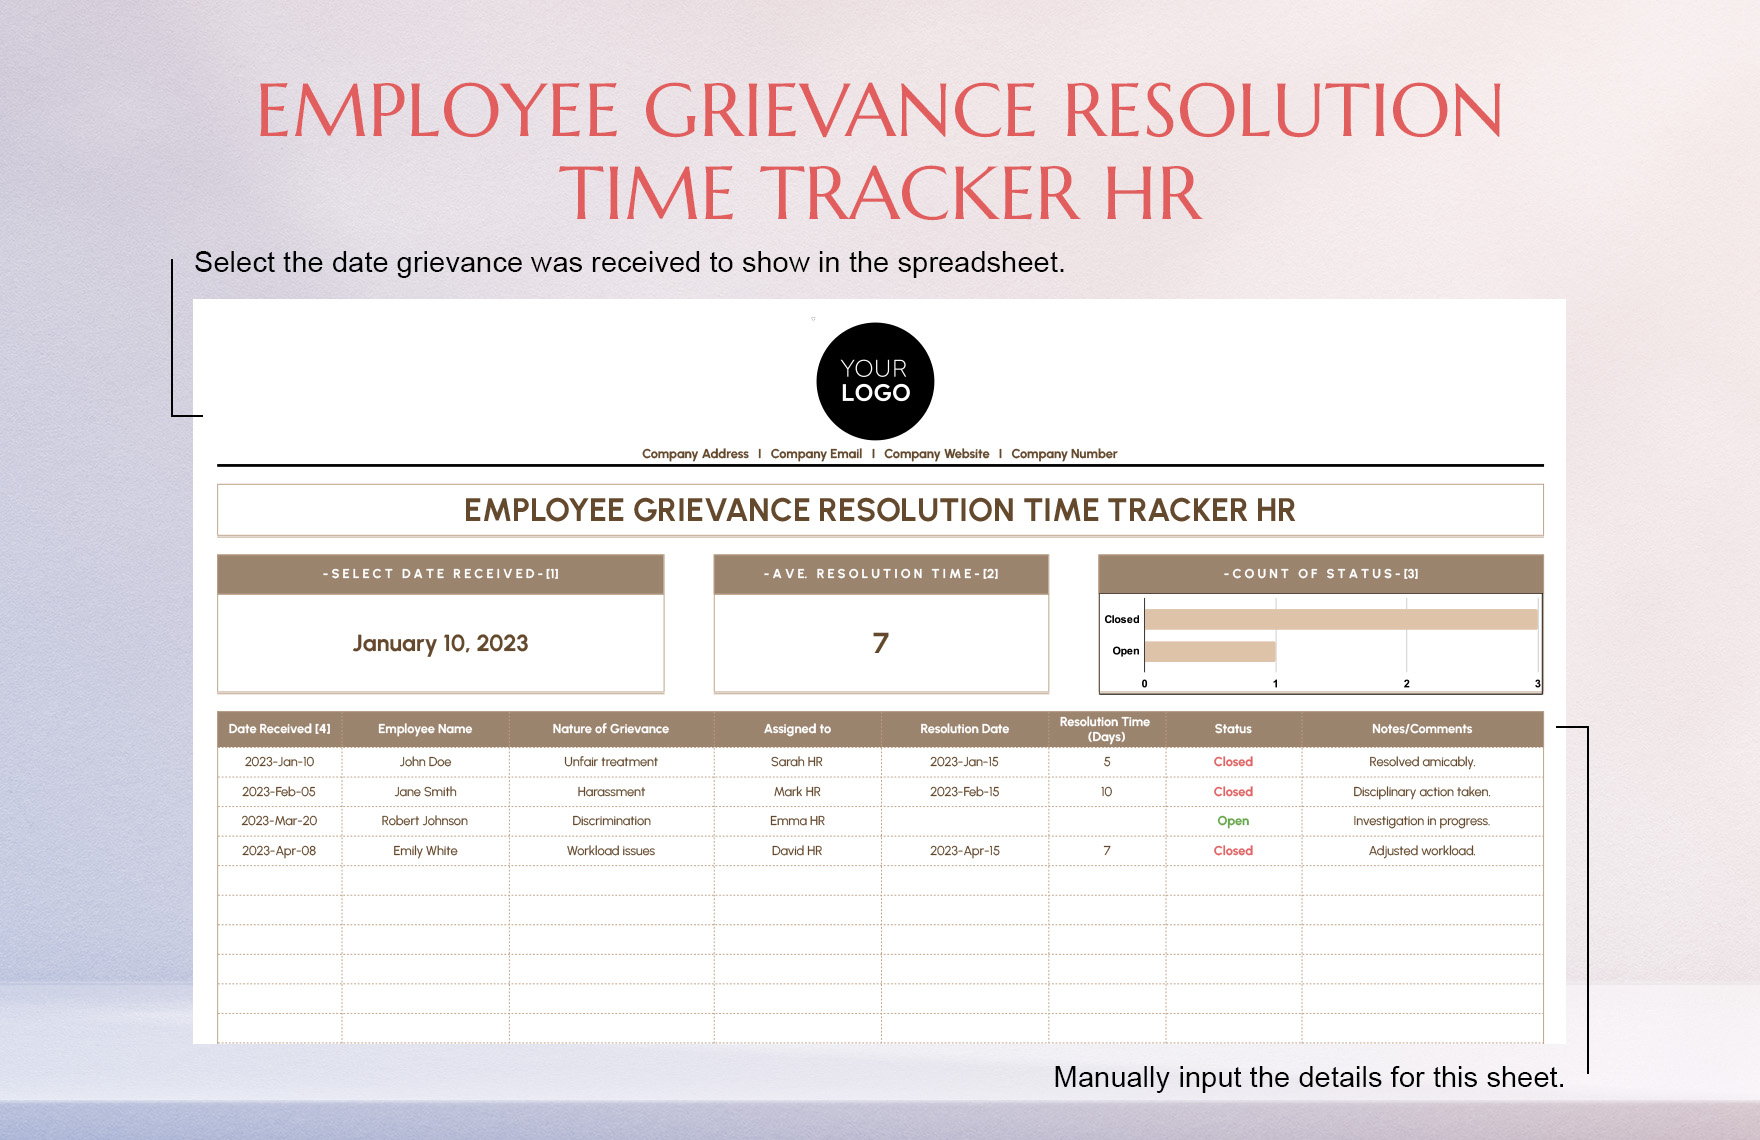 Employee Grievance Resolution Time Tracker HR Template